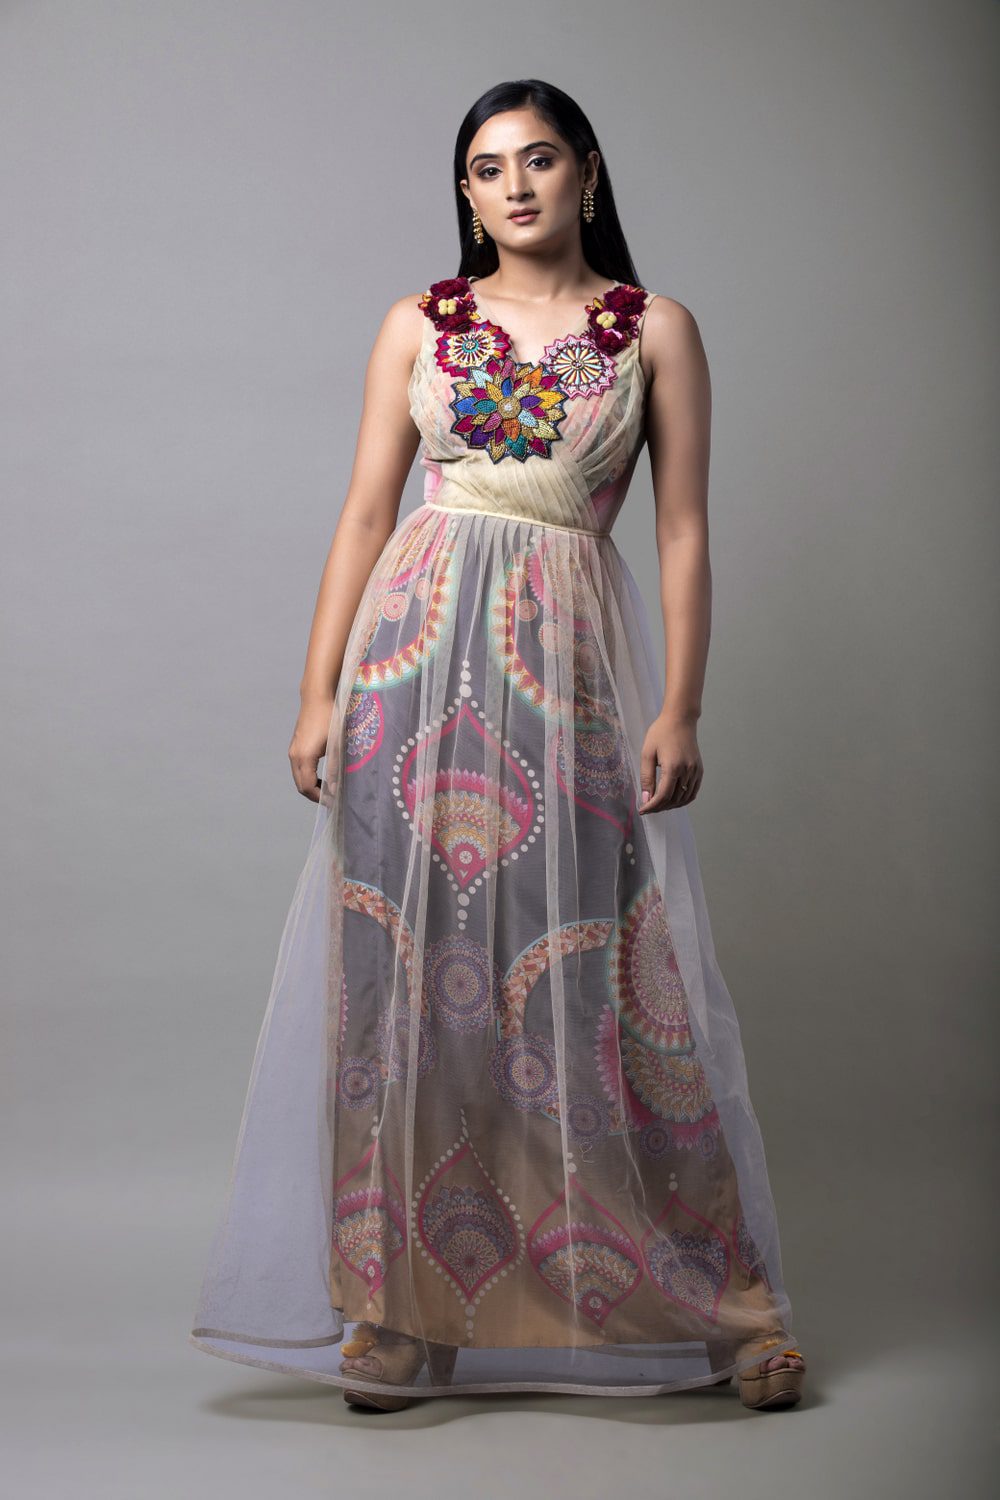 Buy Mandala Print Sequin Ombre Gown In Toronto - Delhi - New Jersey at Folklore Collections | Party-Wear Printed Gown in Toronto - Delhi - Dubai Form Folklore